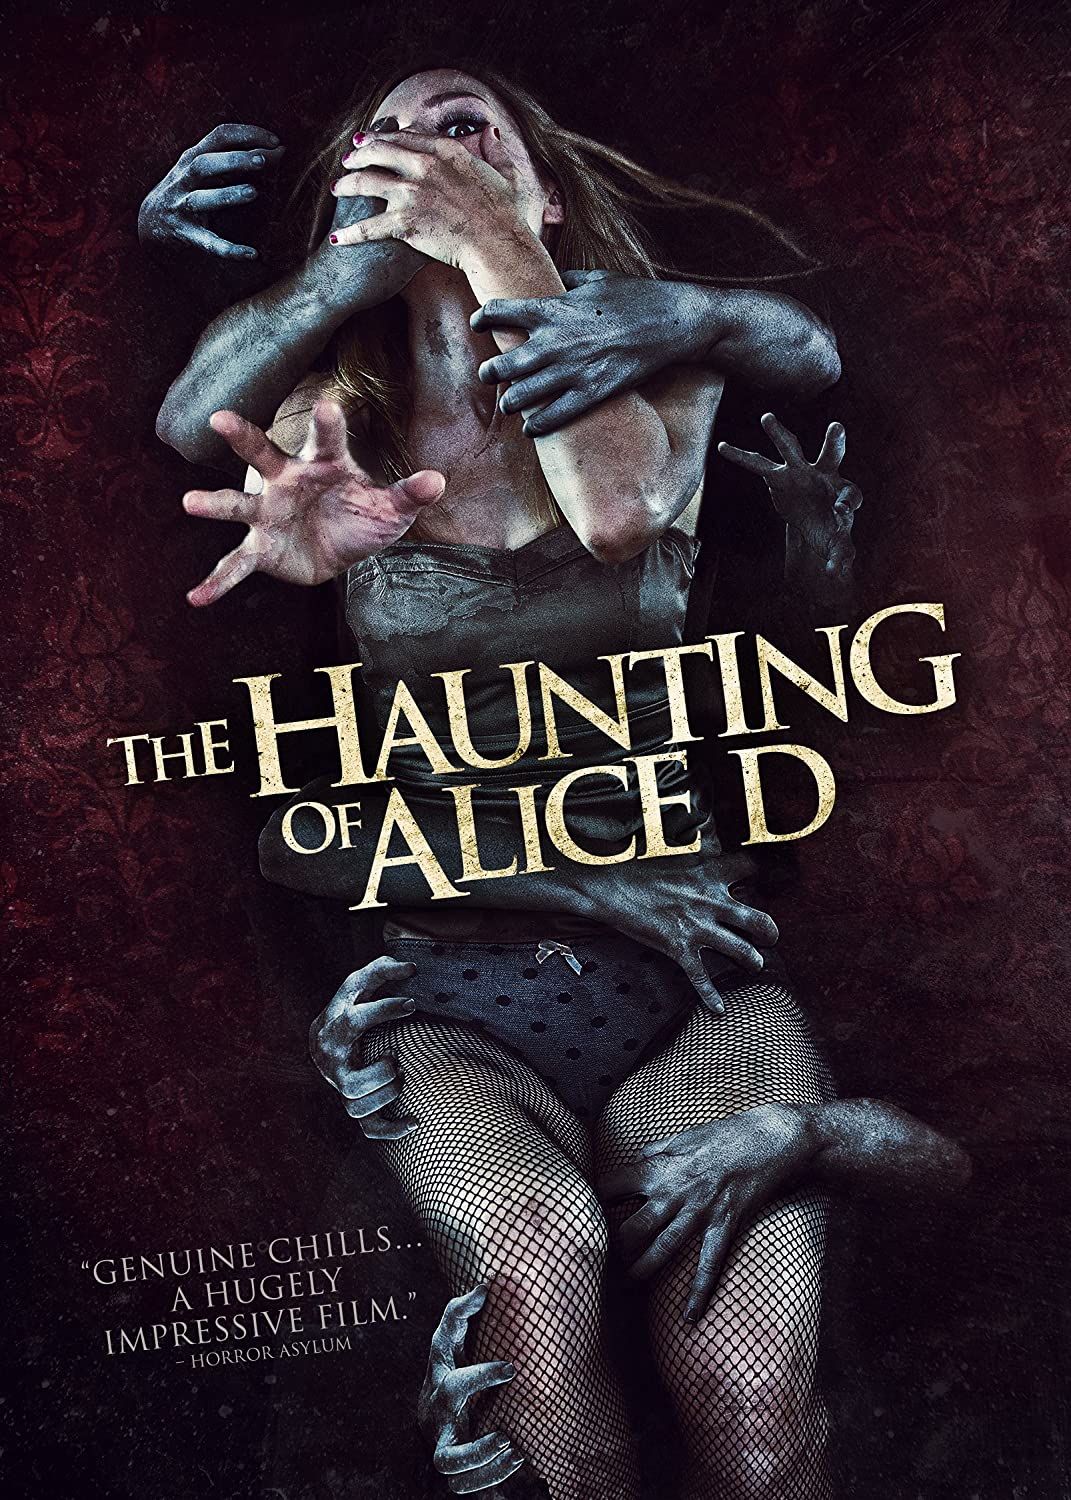 The Haunting Of Alice D Dvd